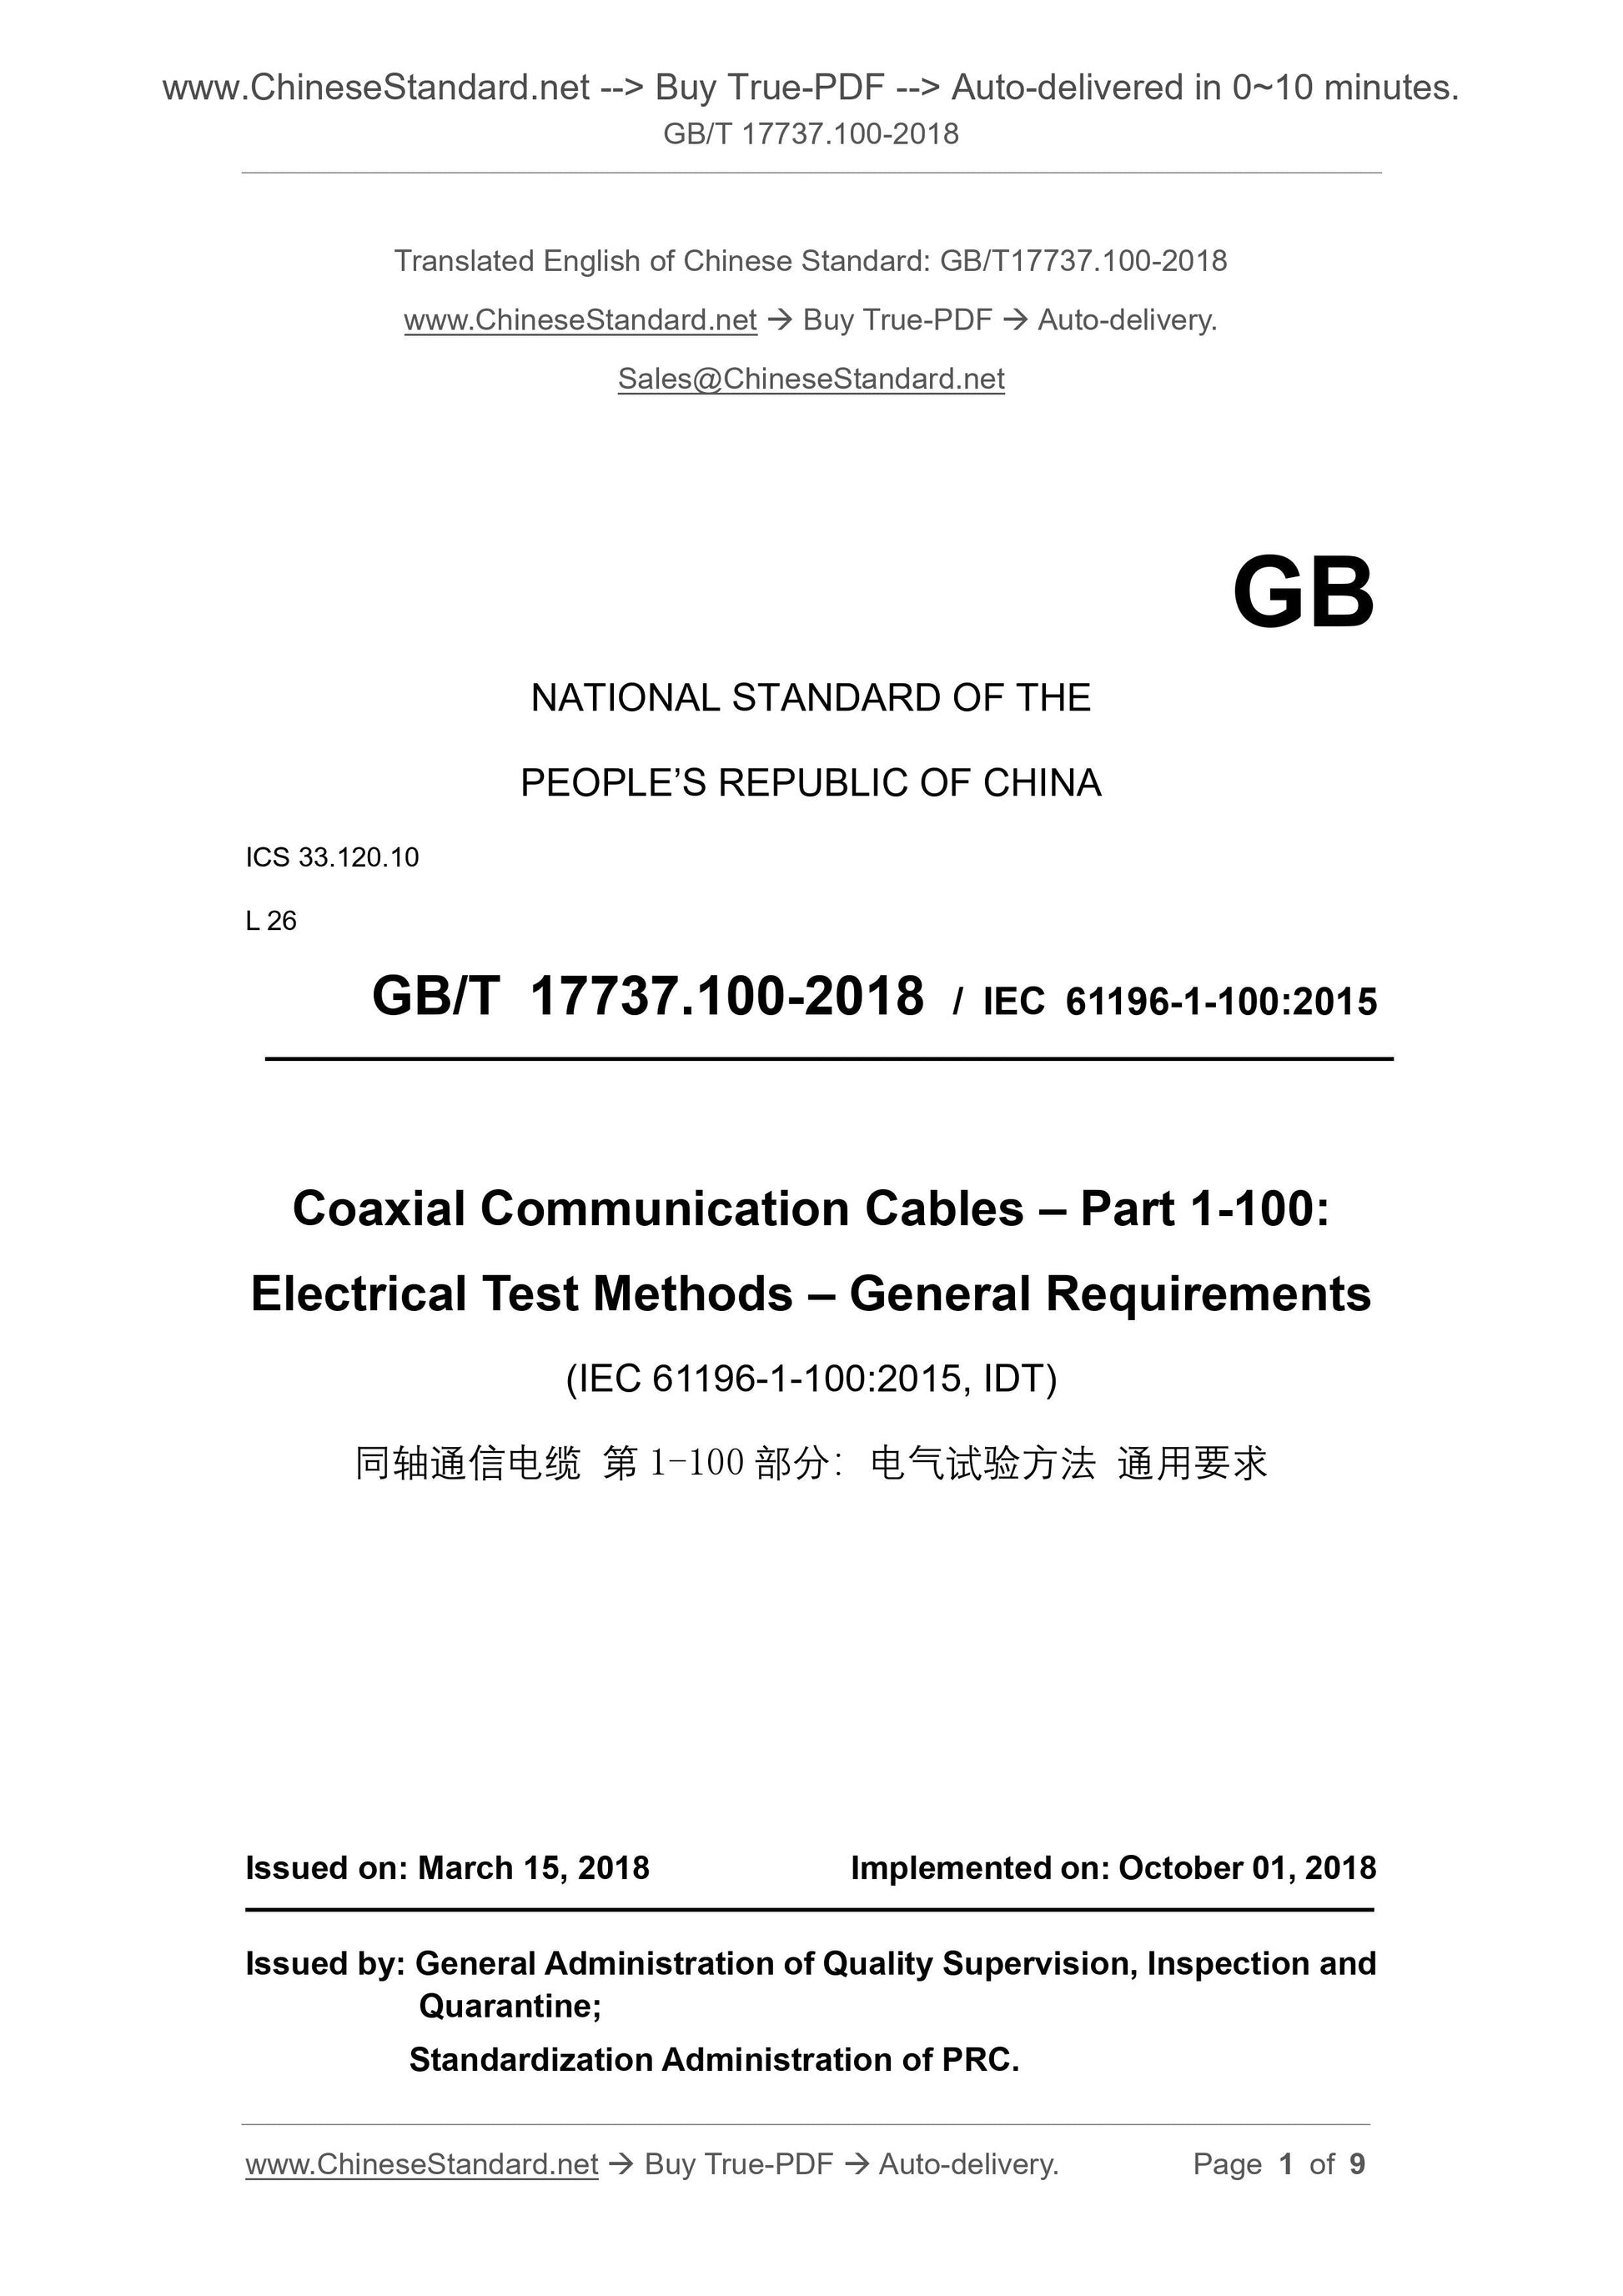 GB/T 17737.100-2018 Page 1